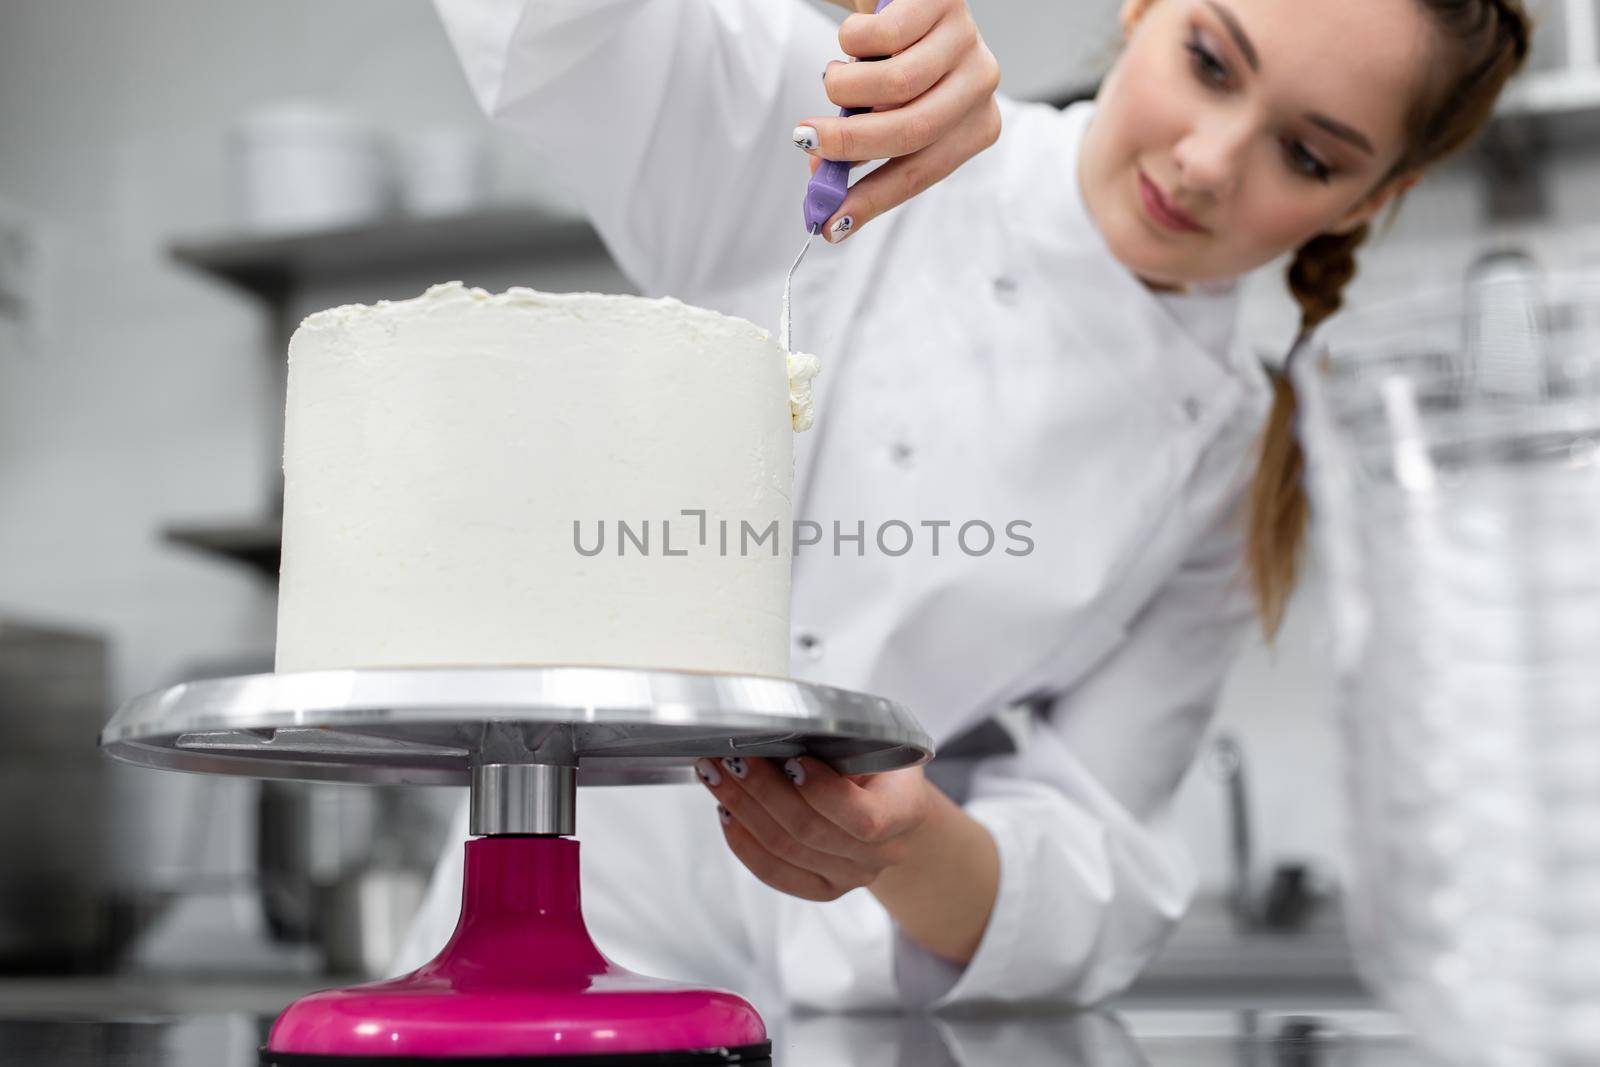 The pastry chef levels the cake with cream